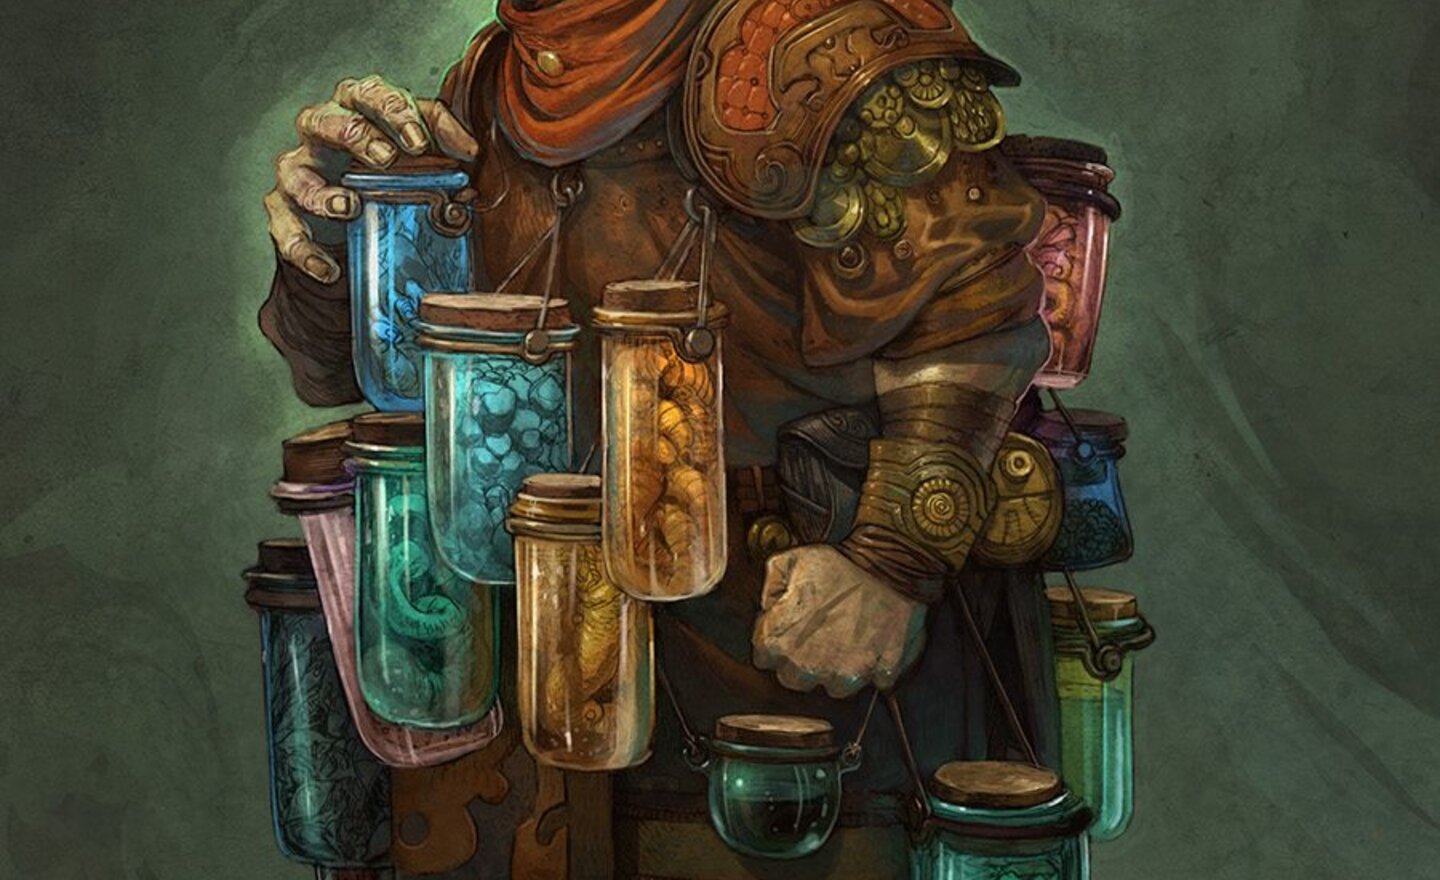 Image of The Jar Wizard